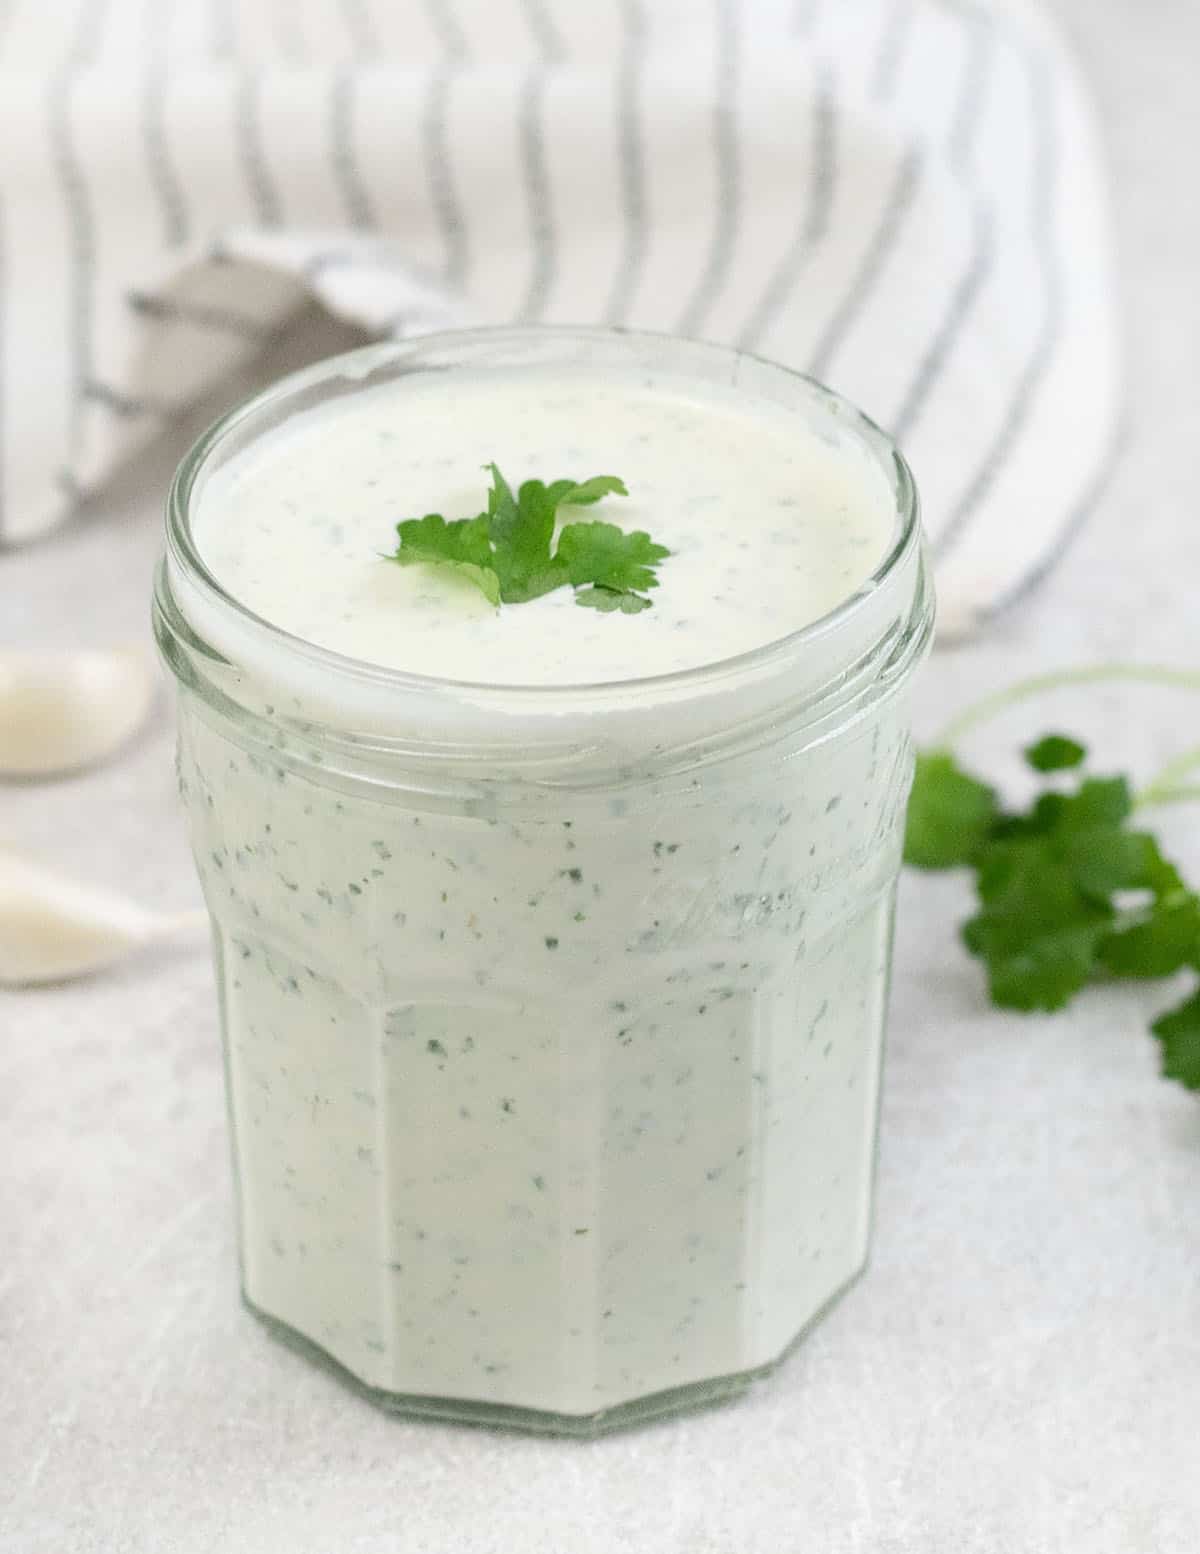 cilantro garlic sauce with lime in a jar.